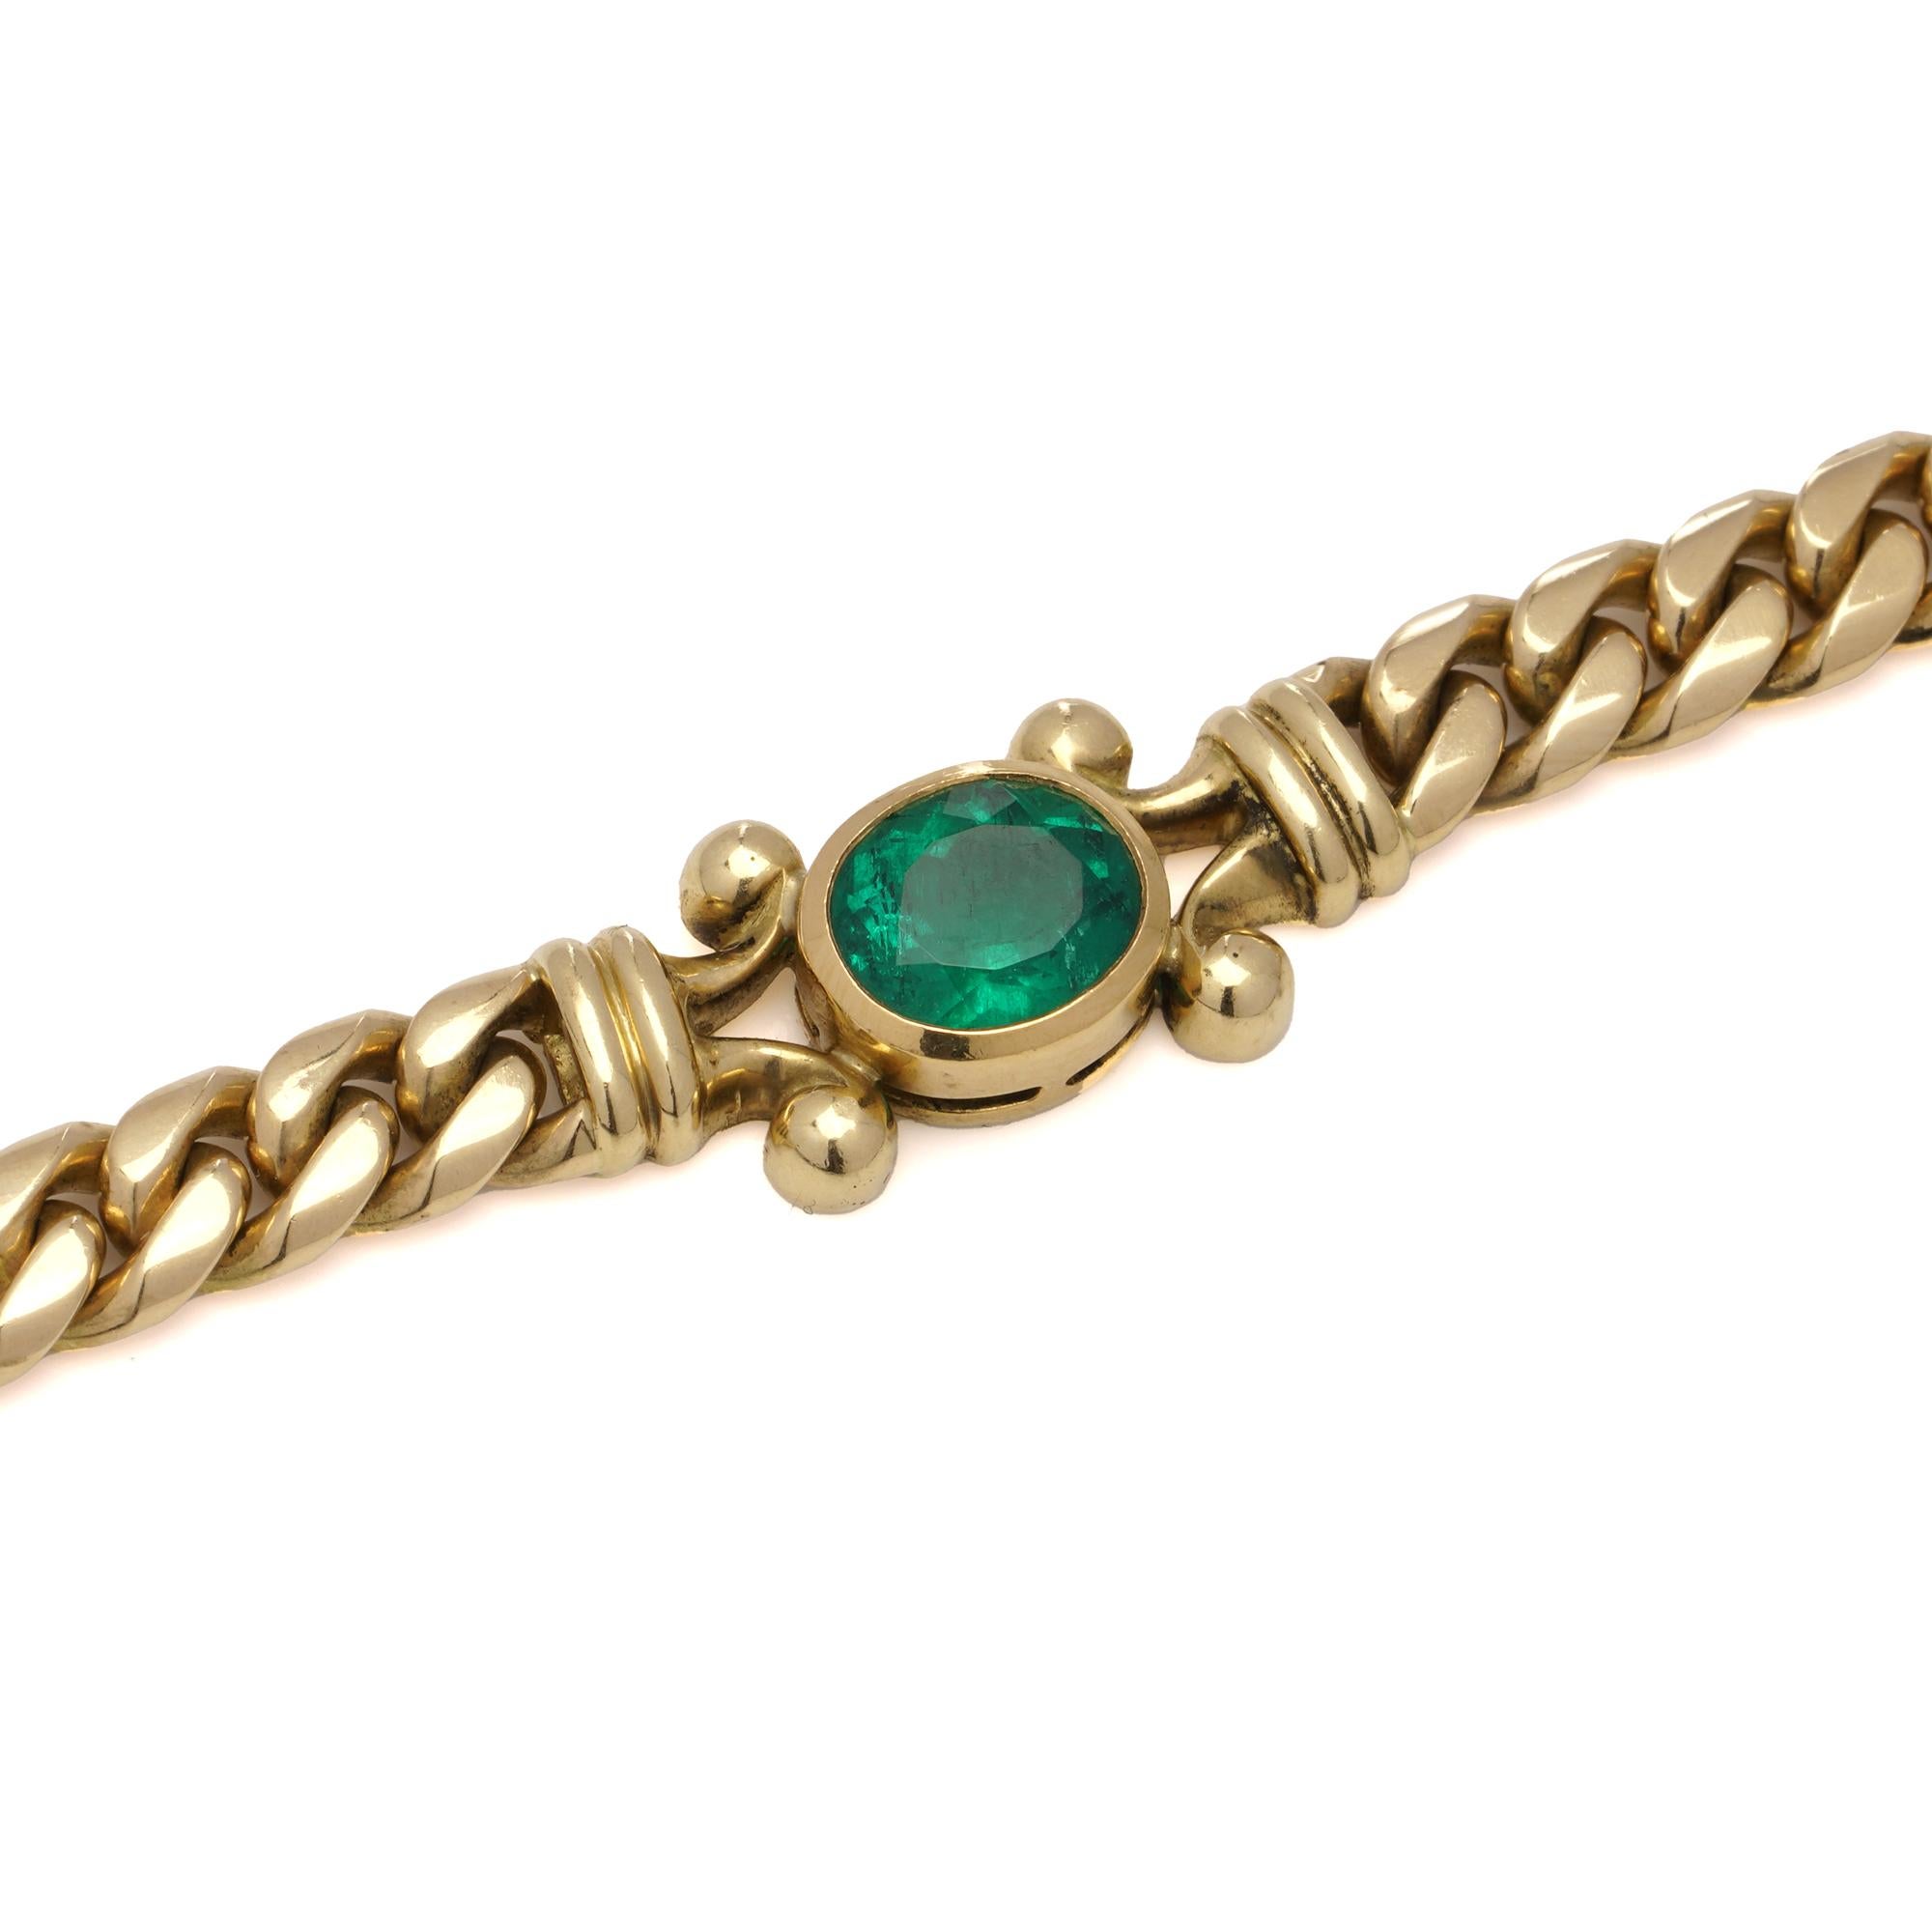 Theo Fennell 18kt gold and emerald curb link necklace.
The emerald is positioned at the centre of the necklace., with a collet setting within split shoulder mounts. 
Made in Italy, After 2000 
Hallmarked with Fennell, 750, and Italian assay office